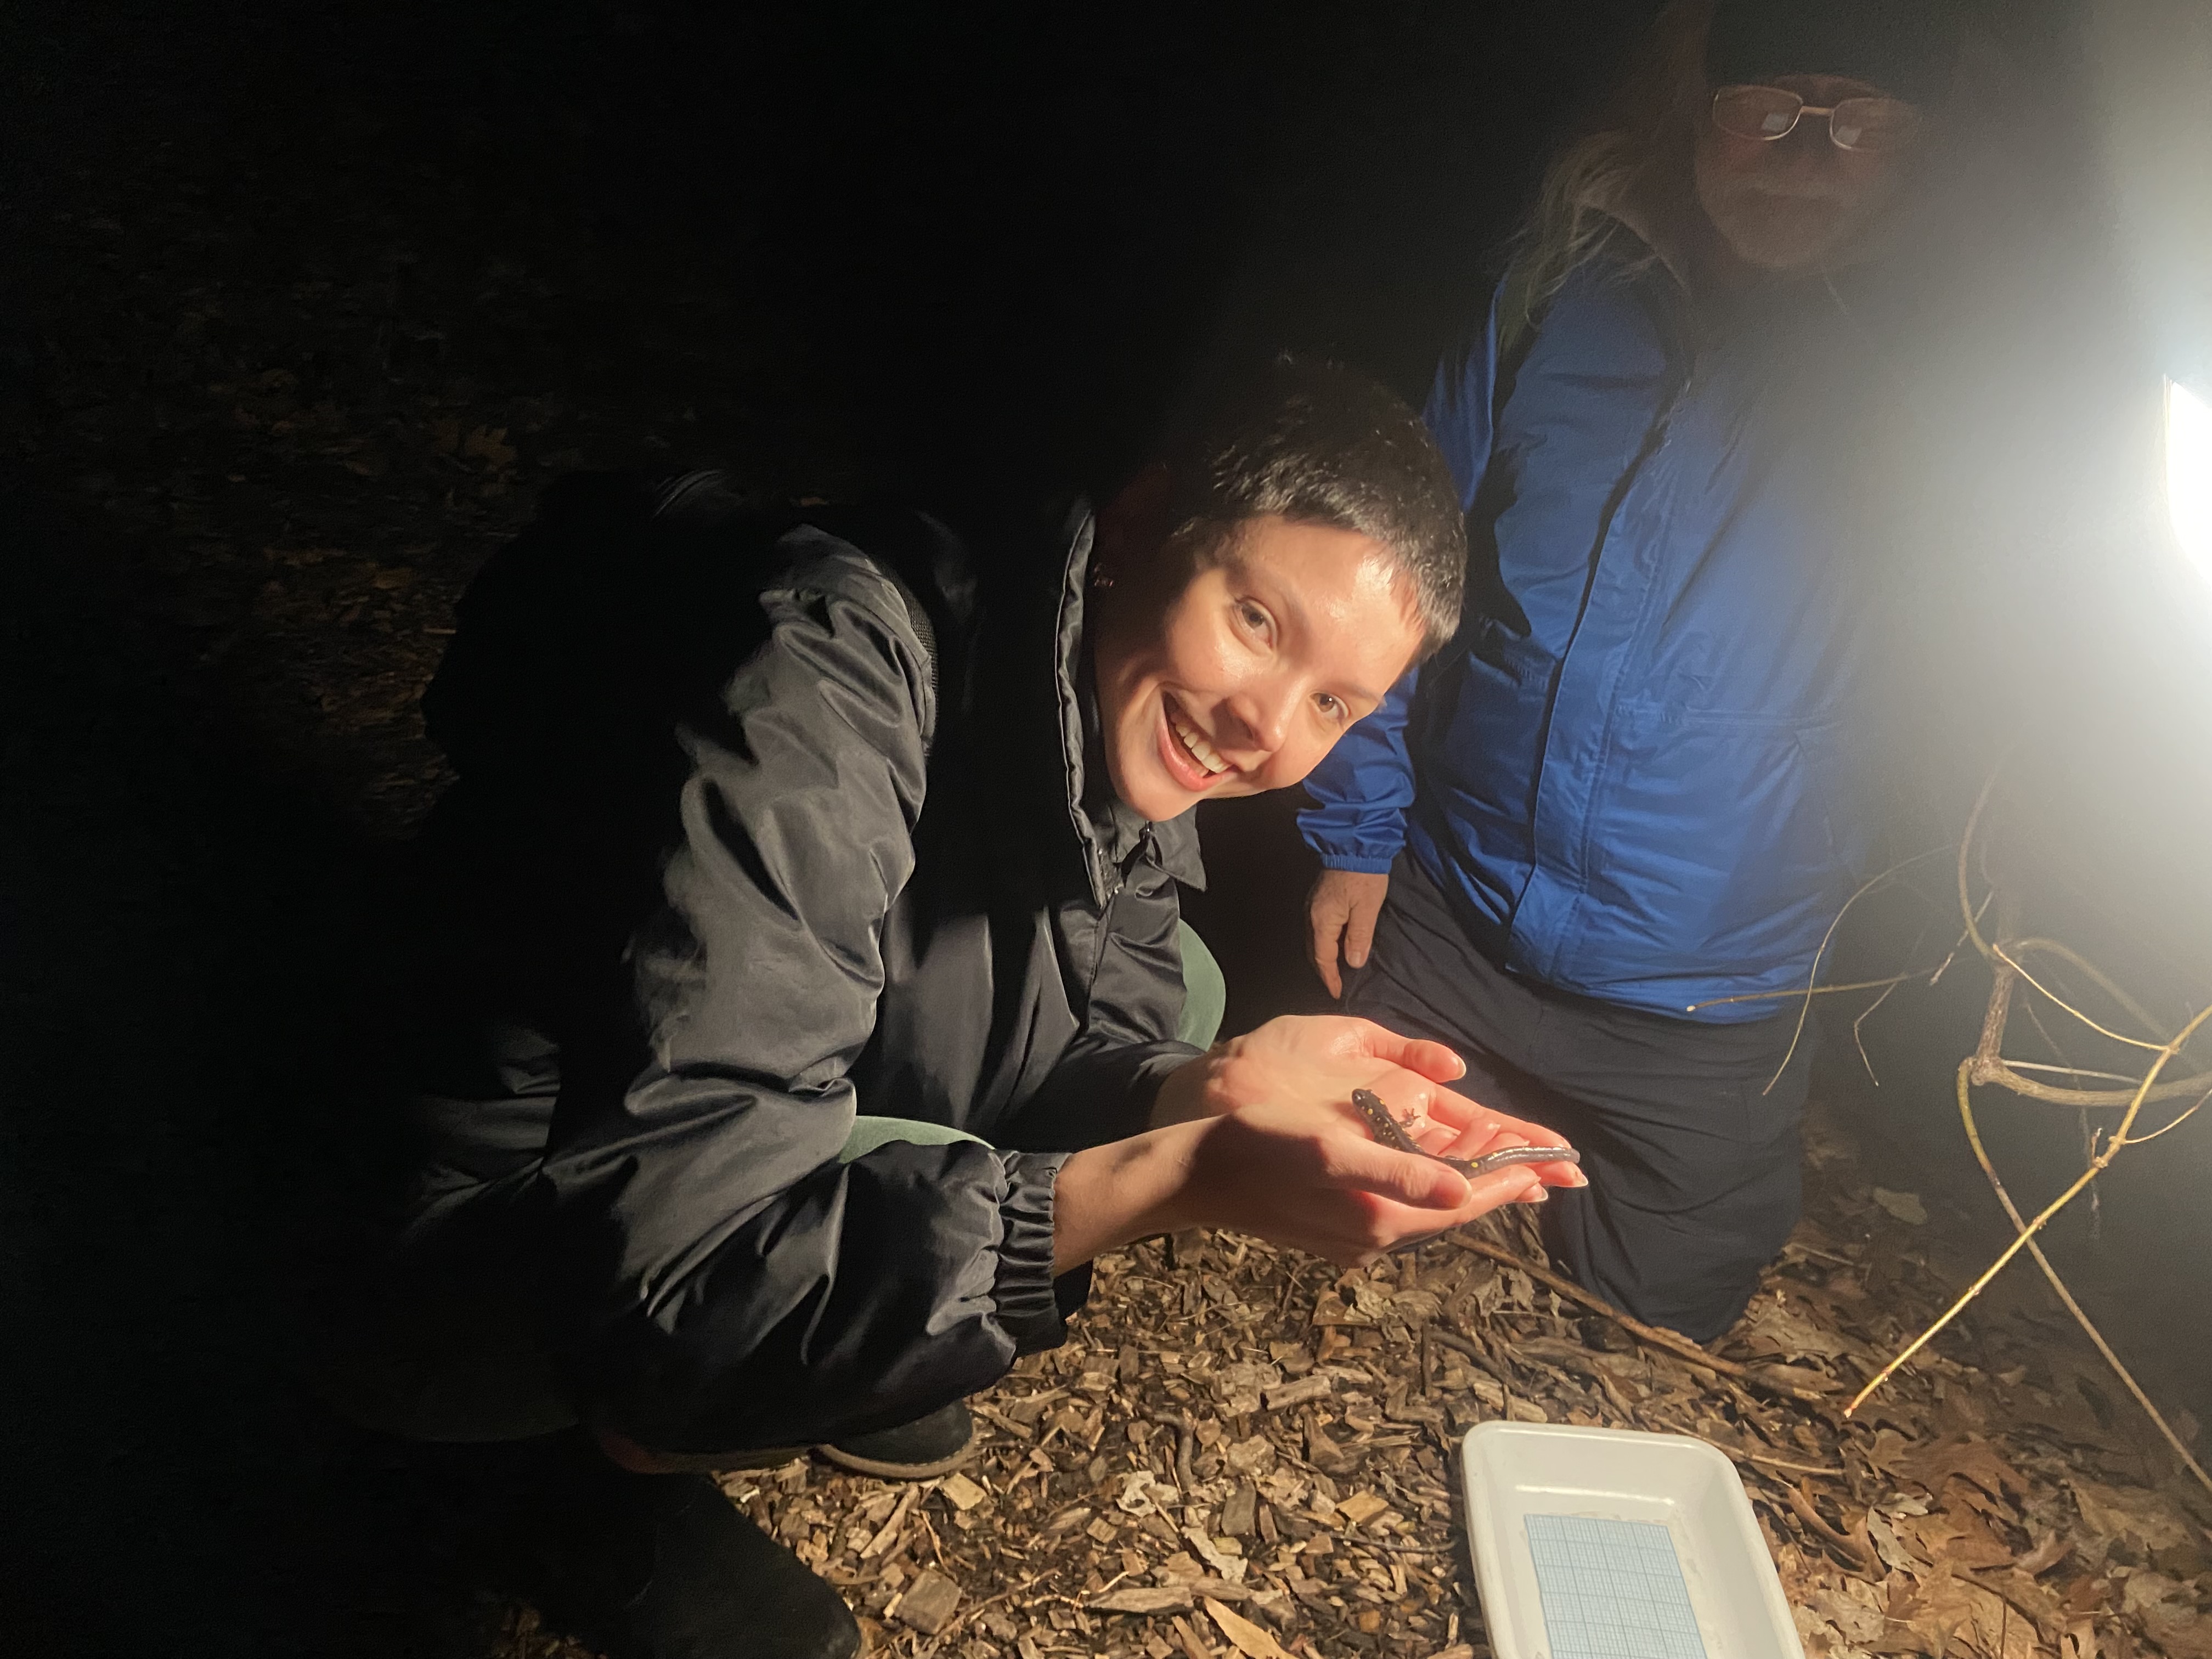 Ecologist Mina Burton '21 with a spotted salamander